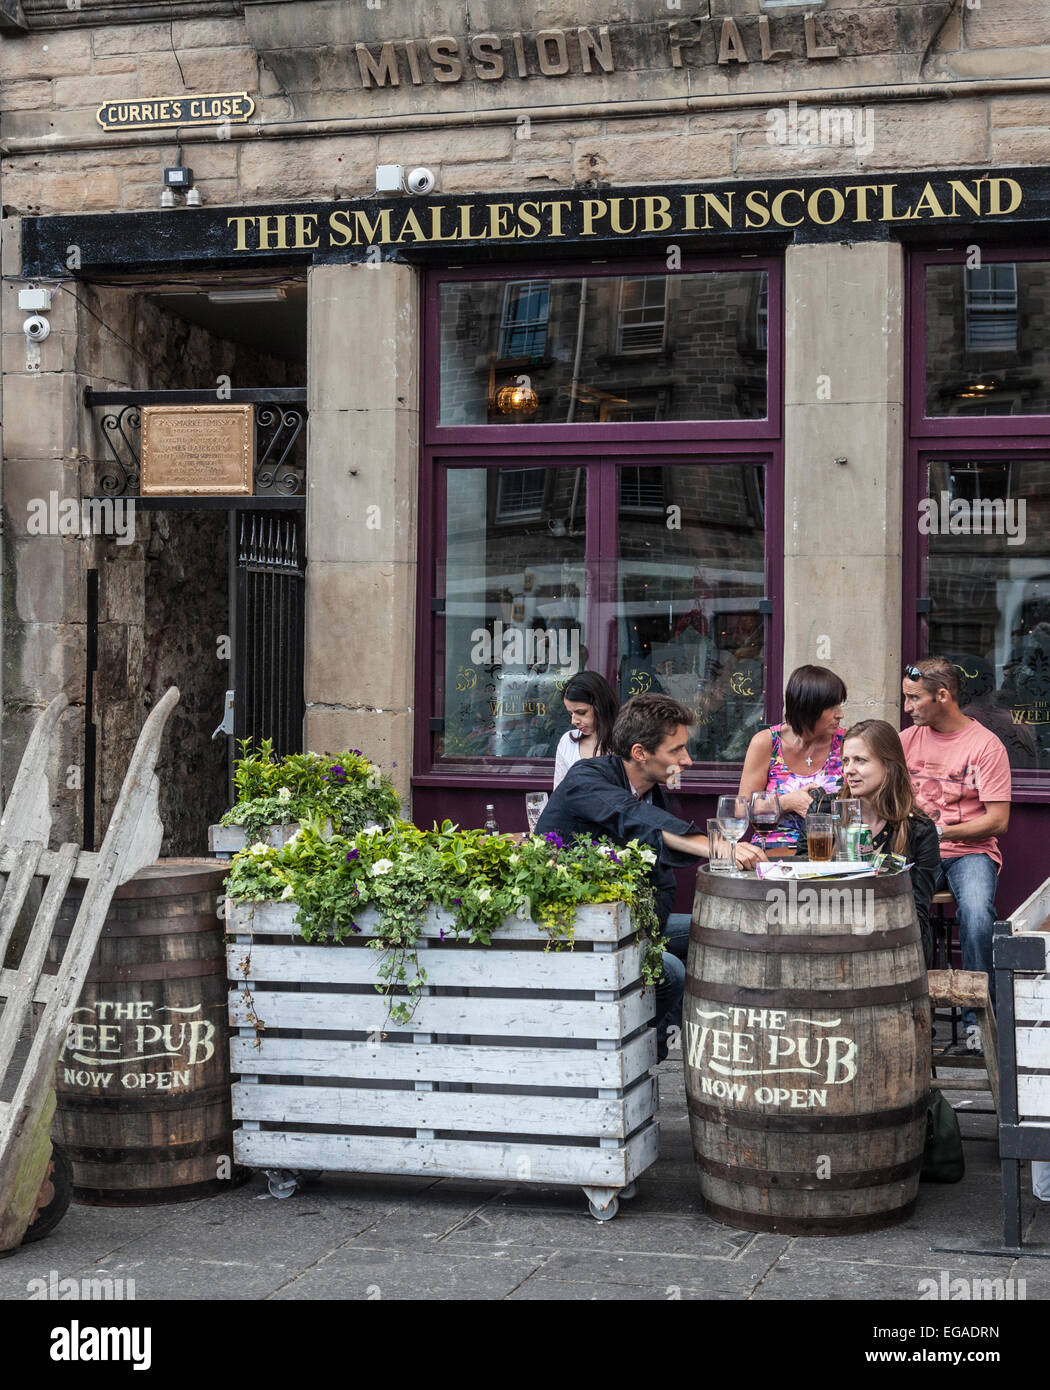 The Wee Pub, opened in 2013 as 'The Smallest Pub in Scotland' in Grassmarket, Edinburgh. It measures c17' x 14' and seats c20. Stock Photo